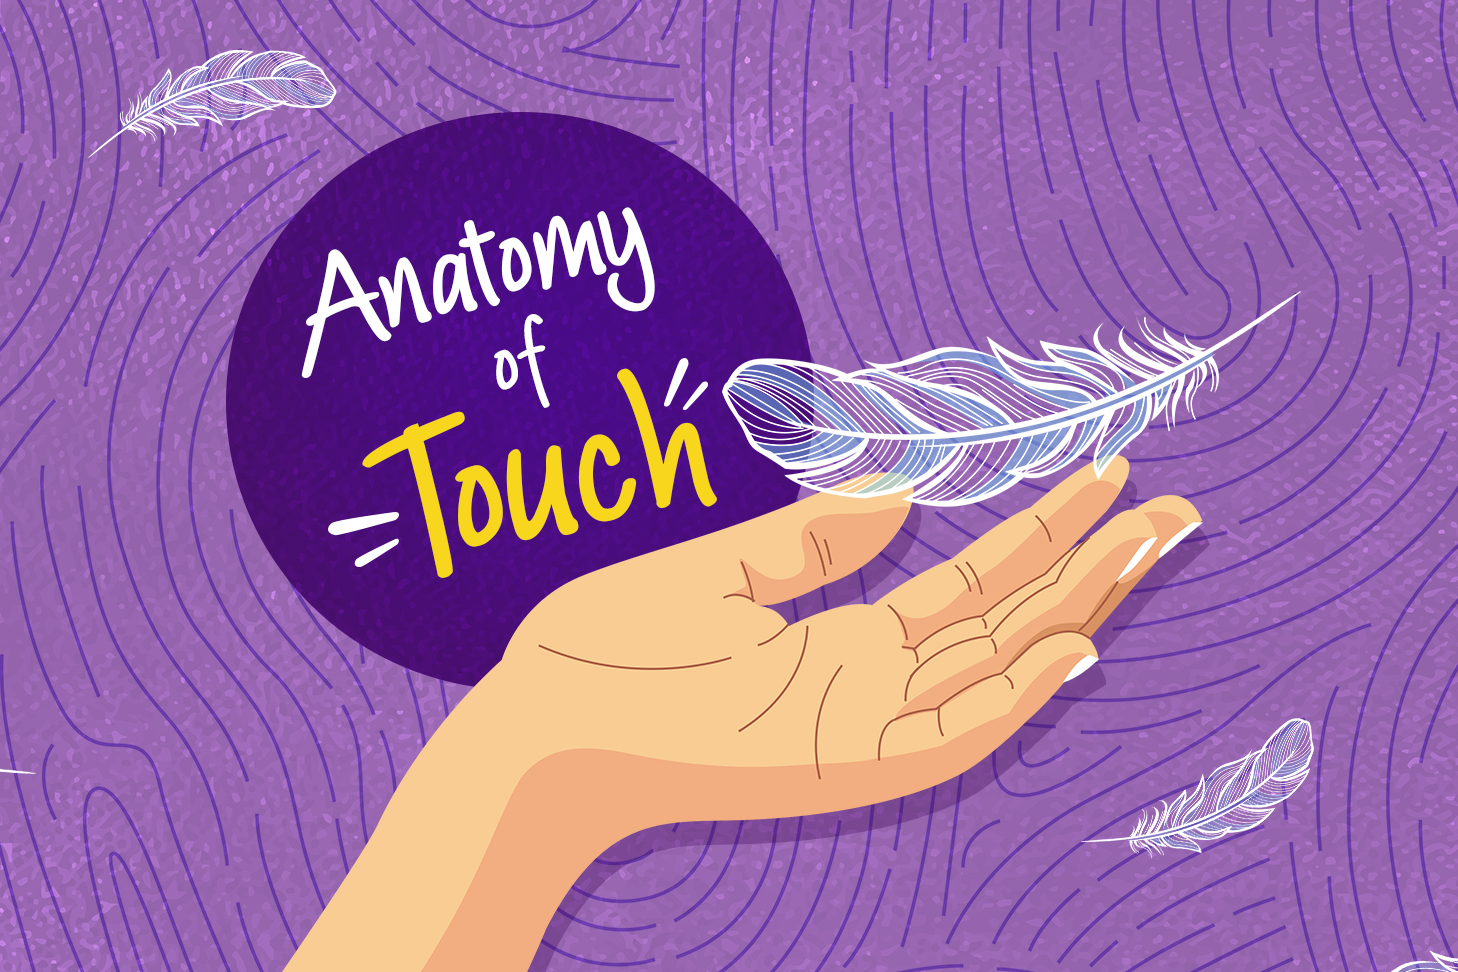 A graphic illustration of a hand catching a feather. The text 'Anatomy of Touch' is in a circle in the background.